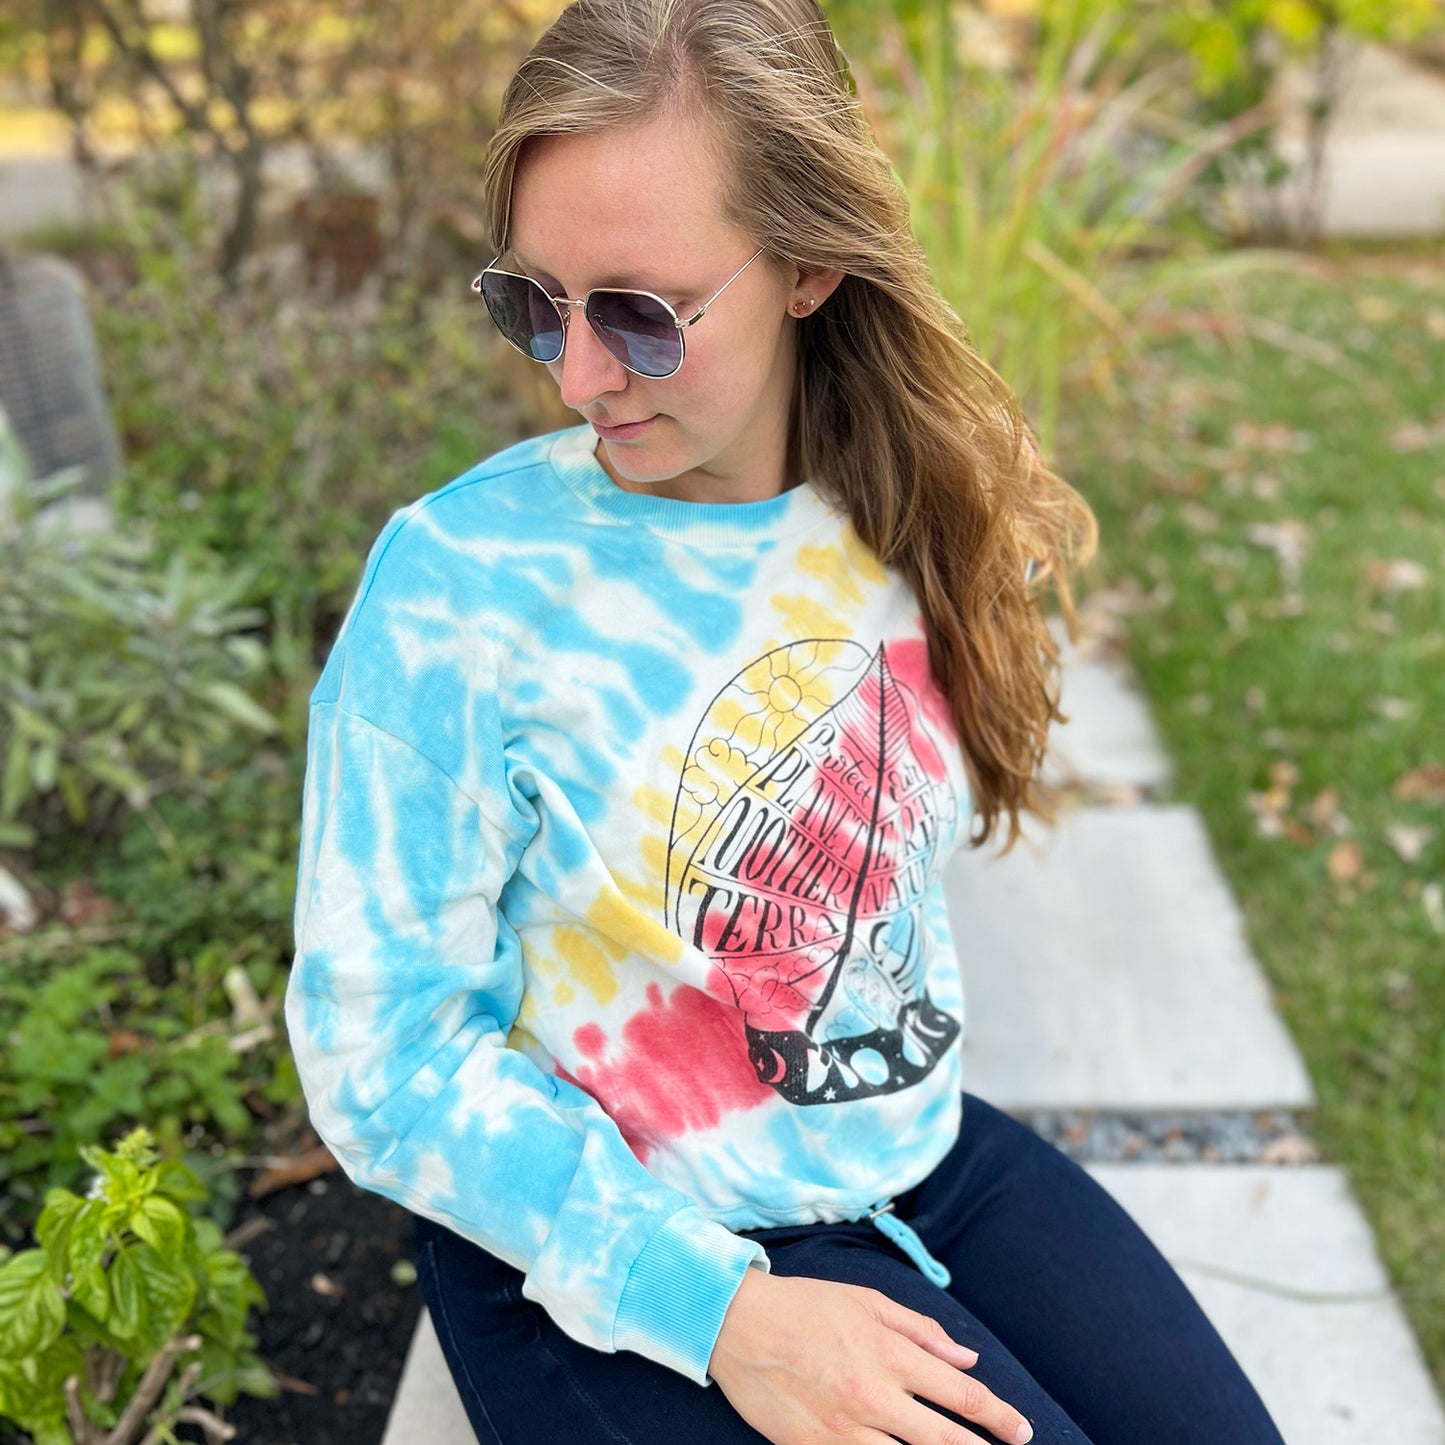 Protect Mother Nature | Tiedye Sweater | Large